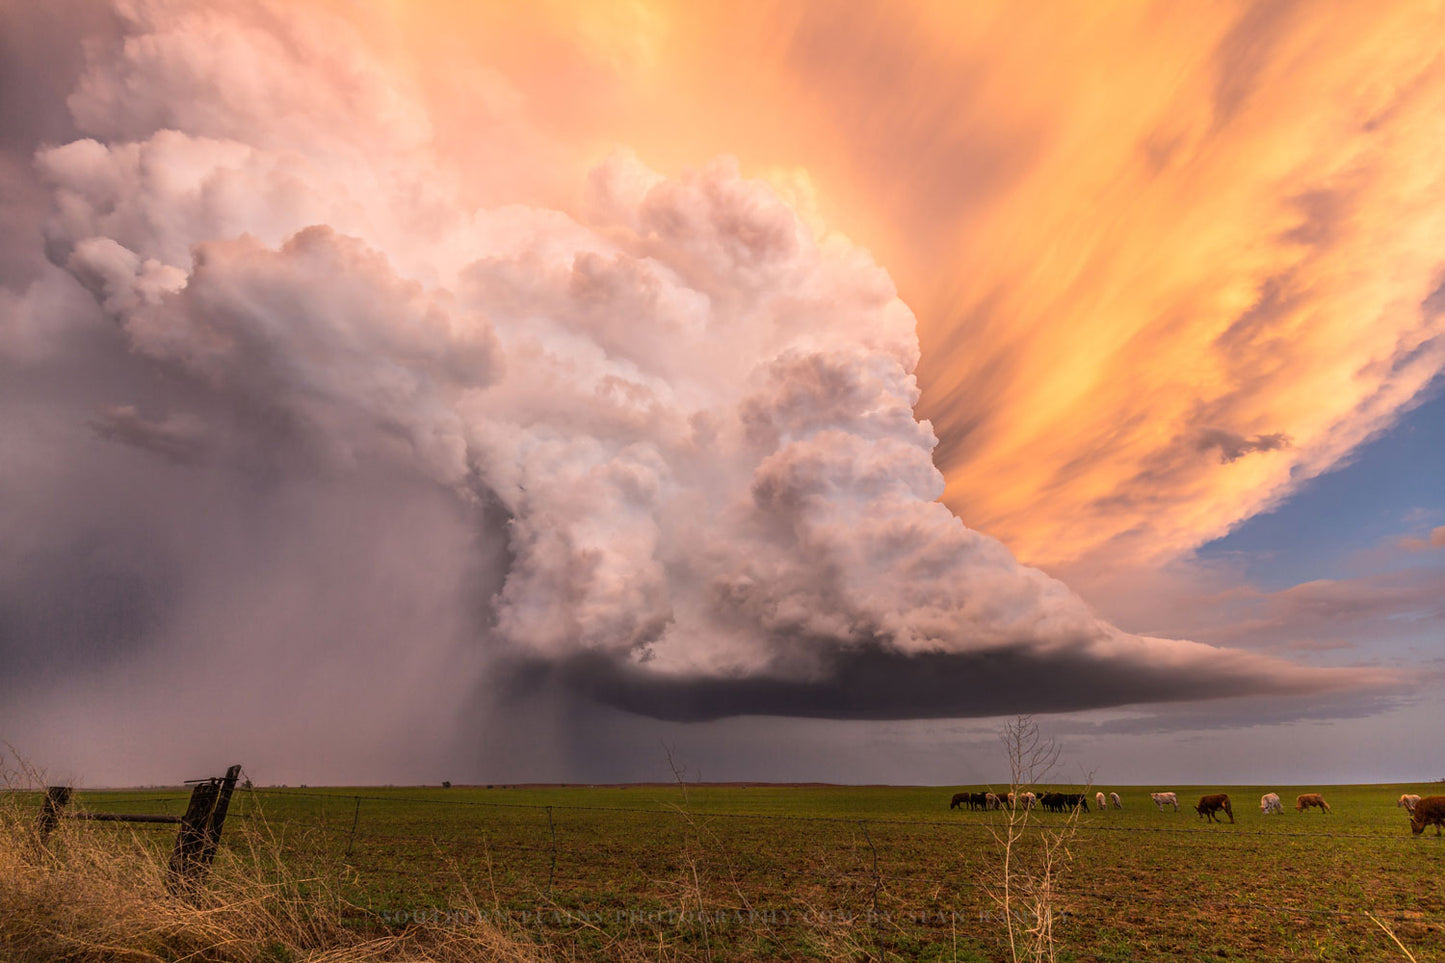 A supercell thunderstorm drenched in golden sunlight on a stormy spring evening in Kansas by Sean Ramsey of Southern Plains Photography.